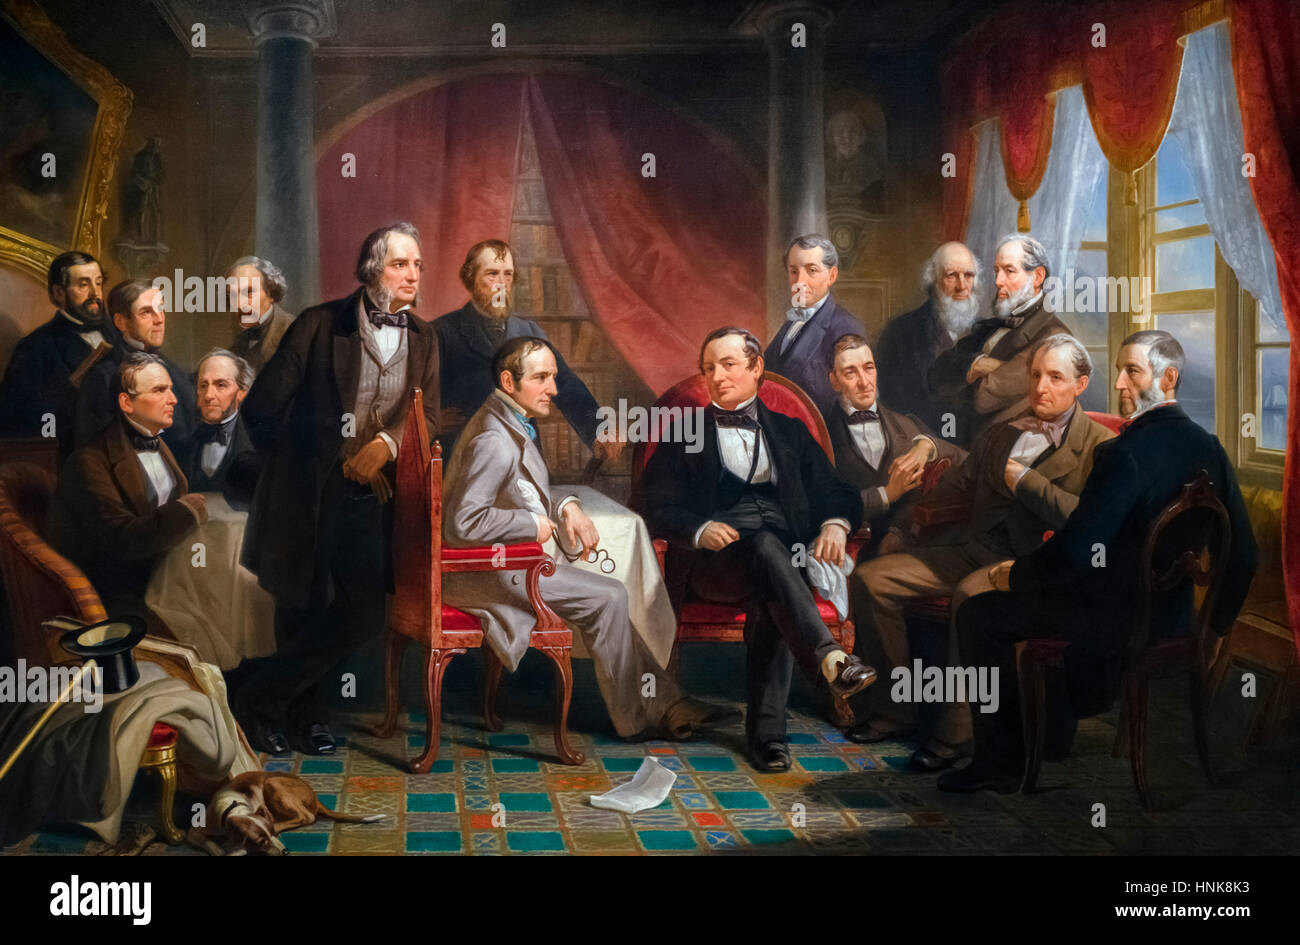 Washington Irving and his Literary Friends at Sunnyside by Christian Schussele after a design by Felix Darley, oil on canvas, 1864. The painting shows an imagined gathering of the leading literary figures of the age. Stock Photo